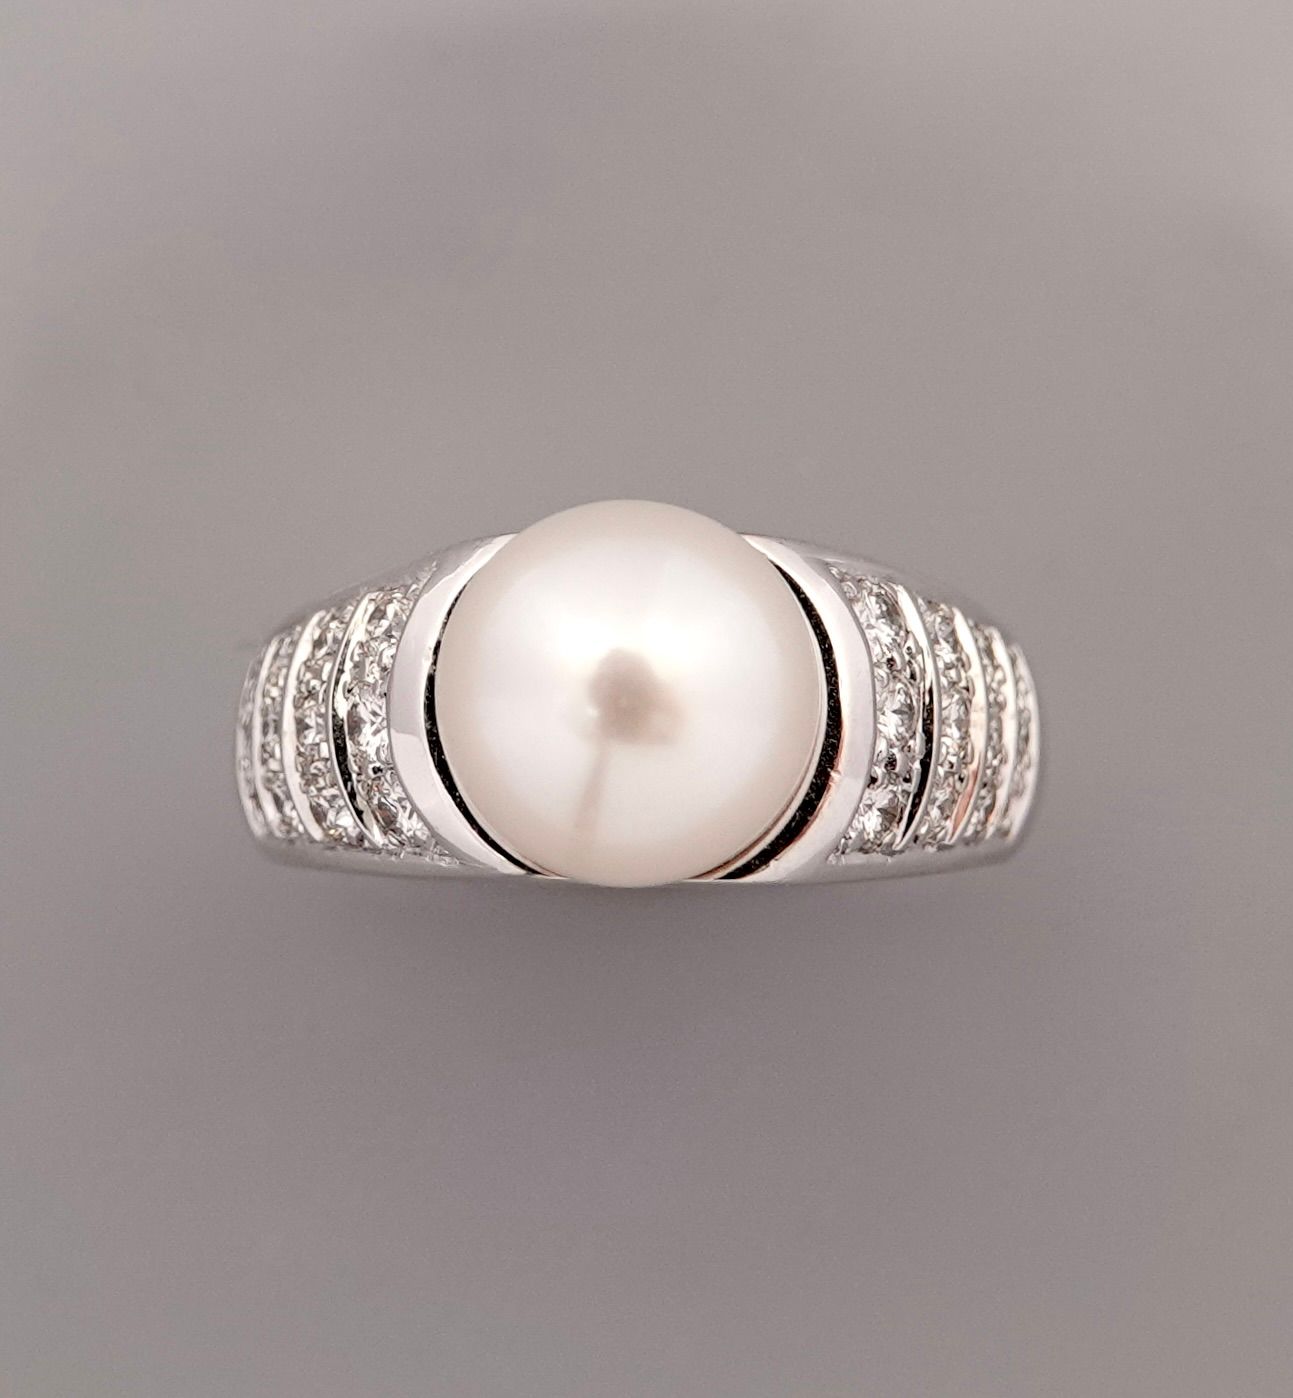 Null Ring in white gold, 750 MM, centered with a cultured pearl diameter 10mm be&hellip;